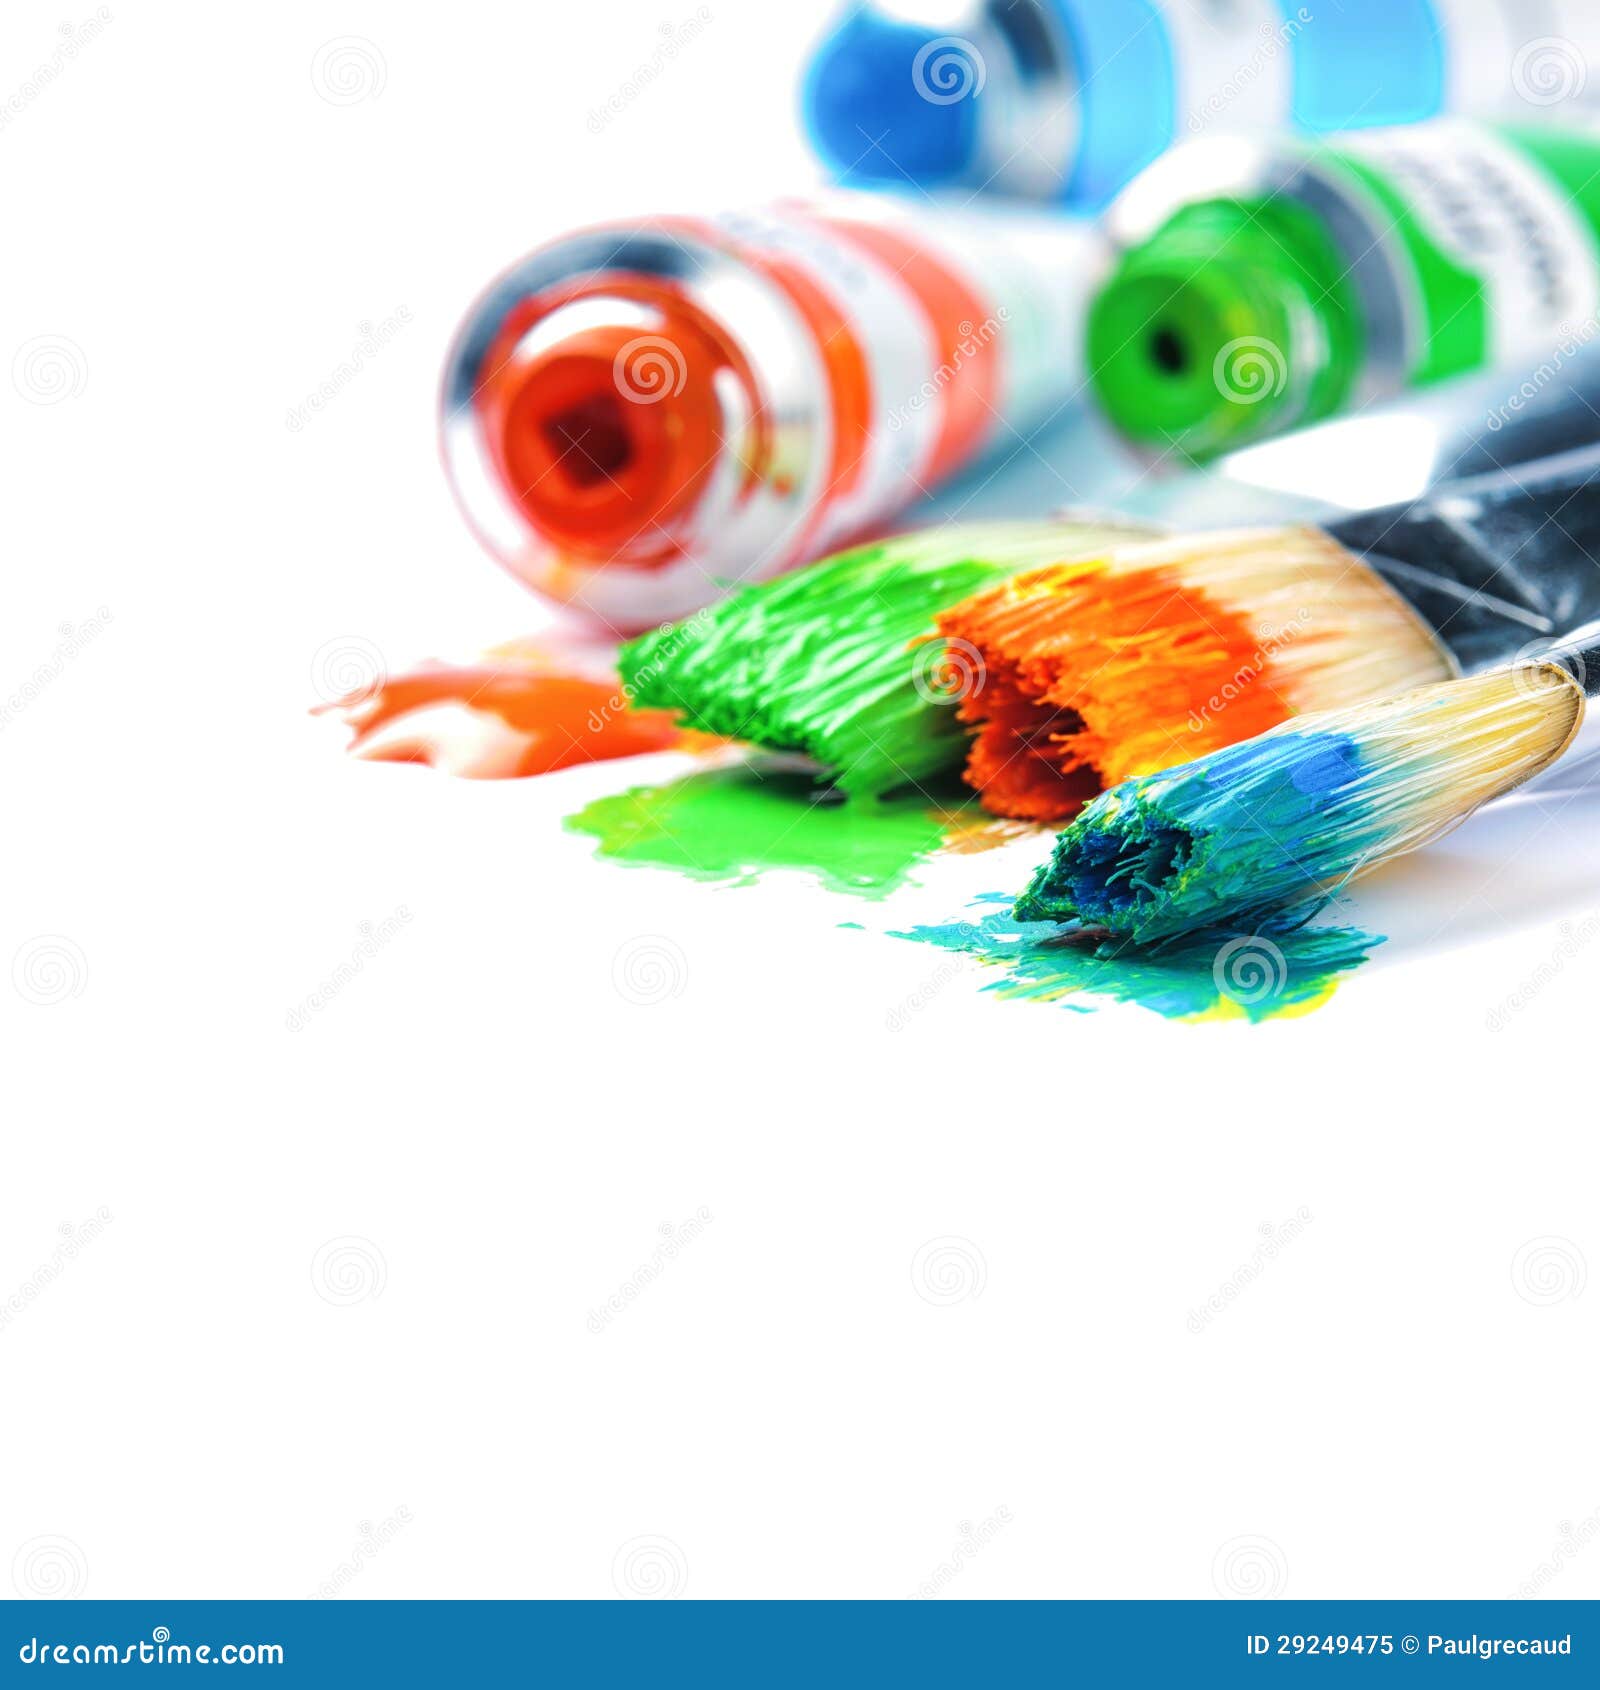 colorful paints and artist brushes